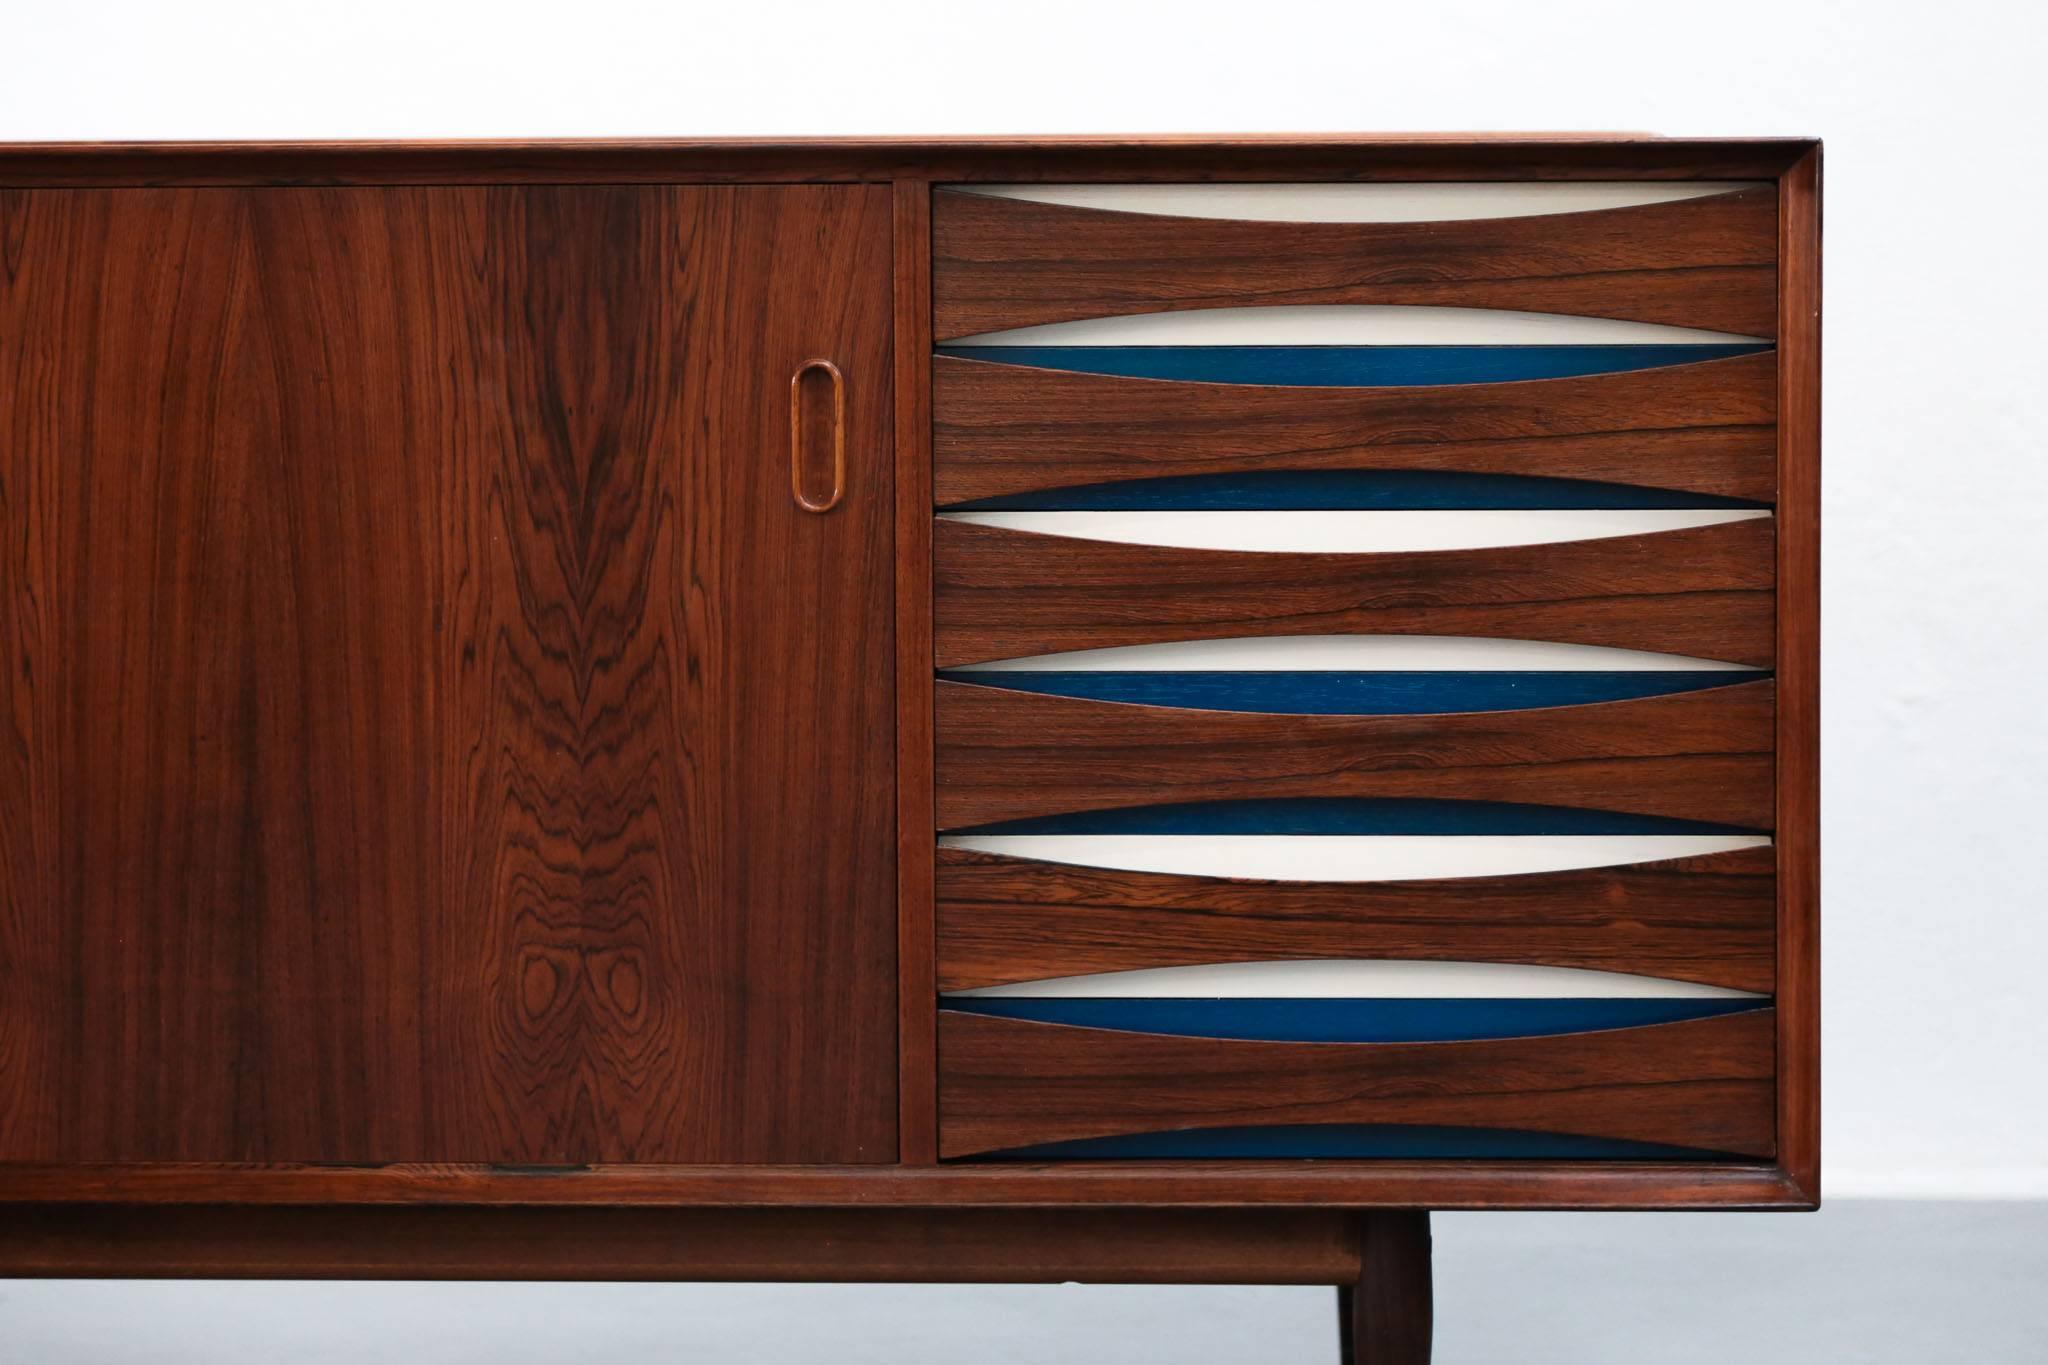 Rare sideboard from Arne Vodder. Two sliding doors with white and blue drawers on the side.
Produced by Sibast, Denmark.